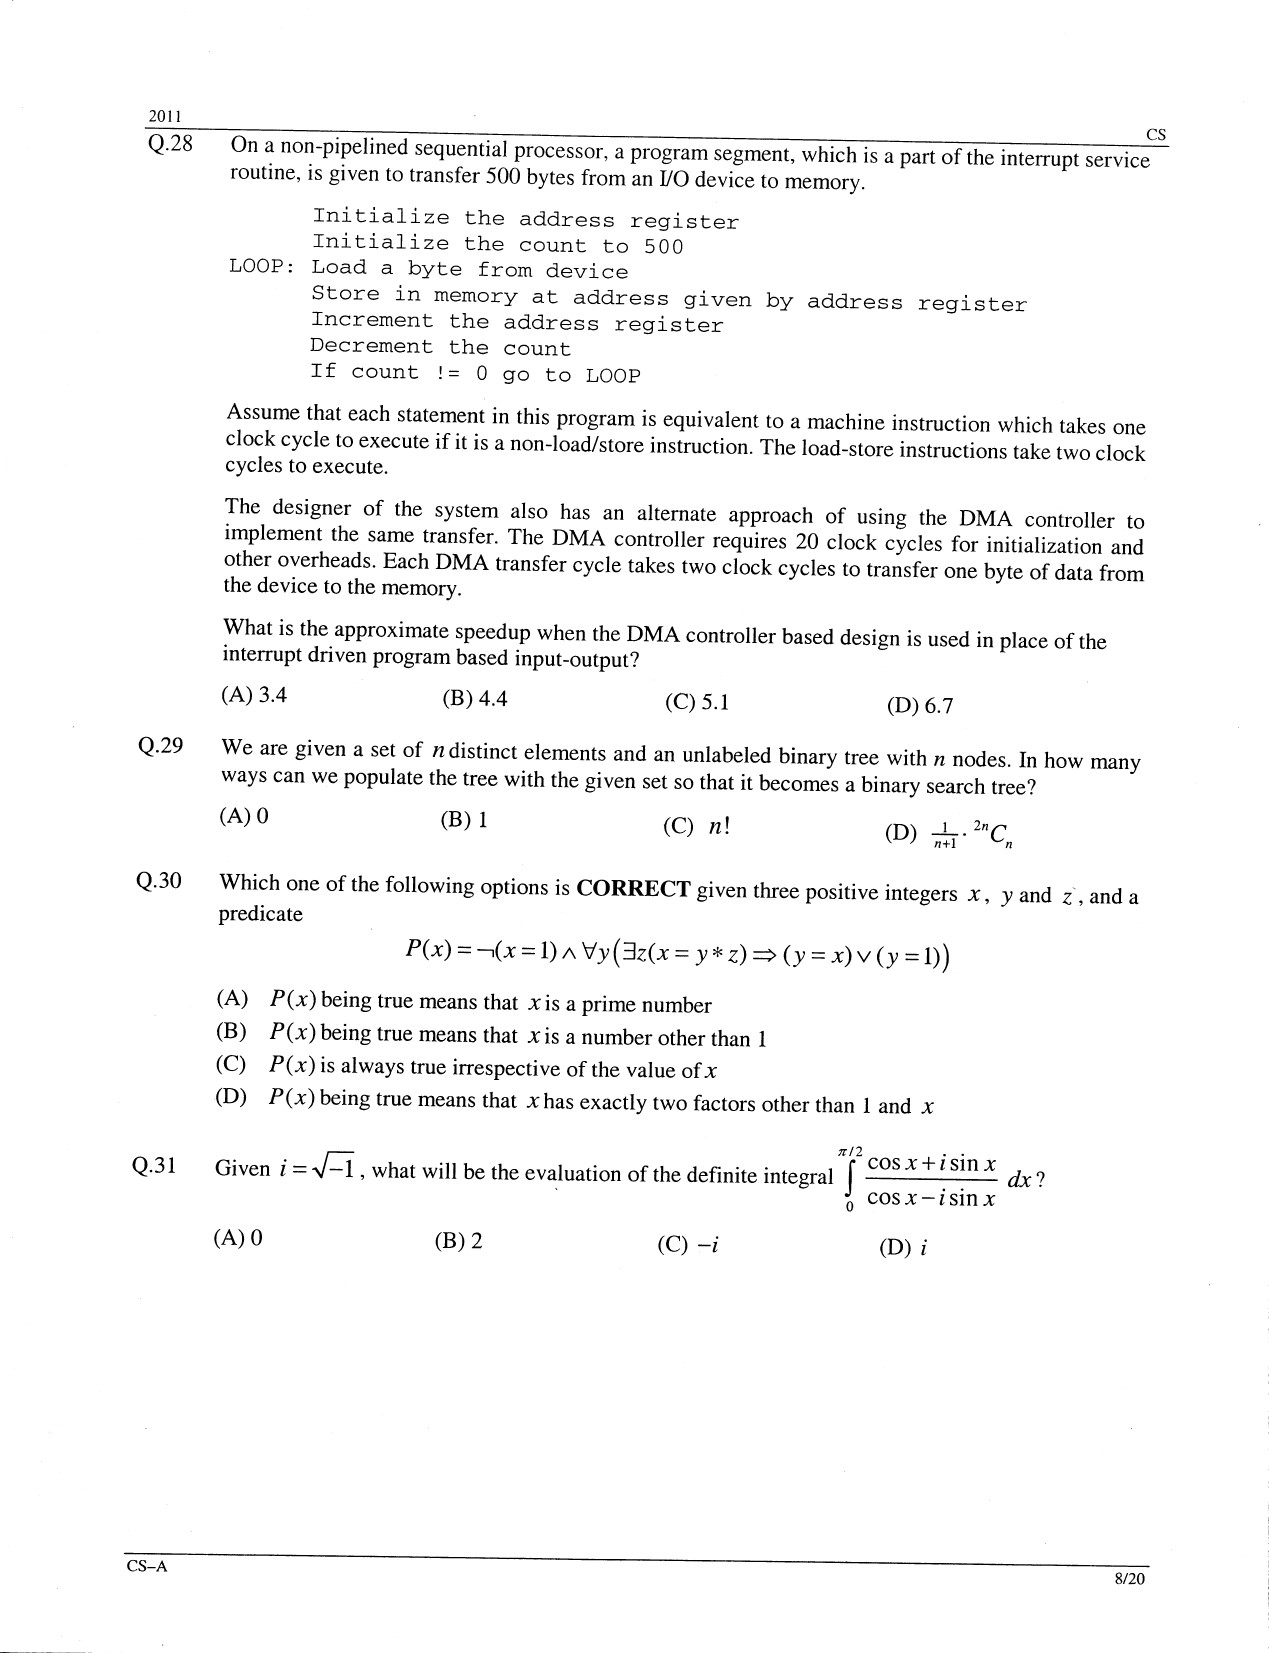 GATE Exam Question Paper 2011 Computer Science and Information Technology 8